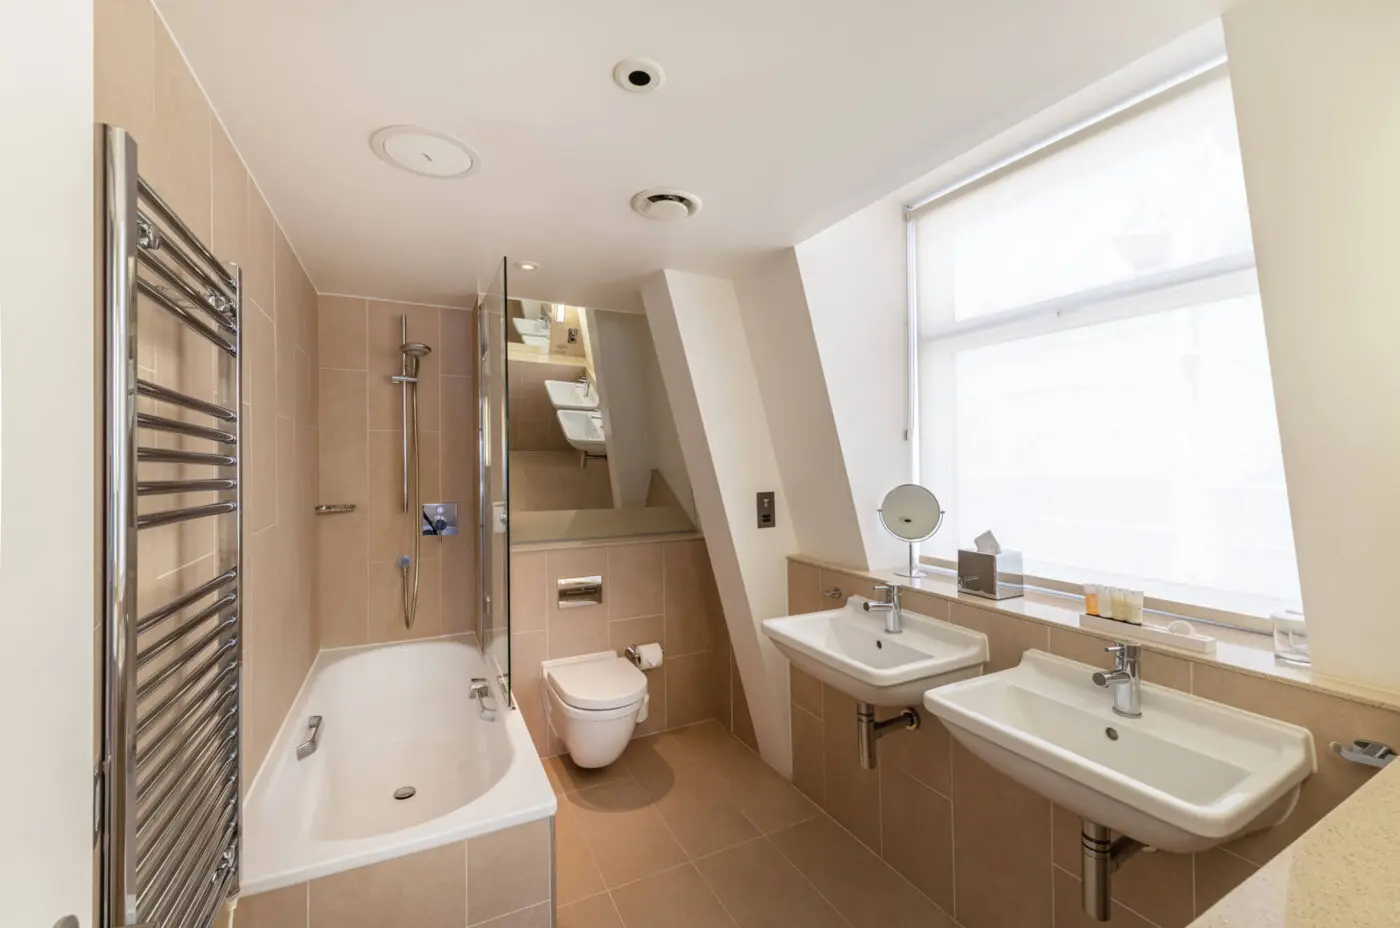 A large bathroom with a built in shower and bathtub and two sinks, located in Victoria.